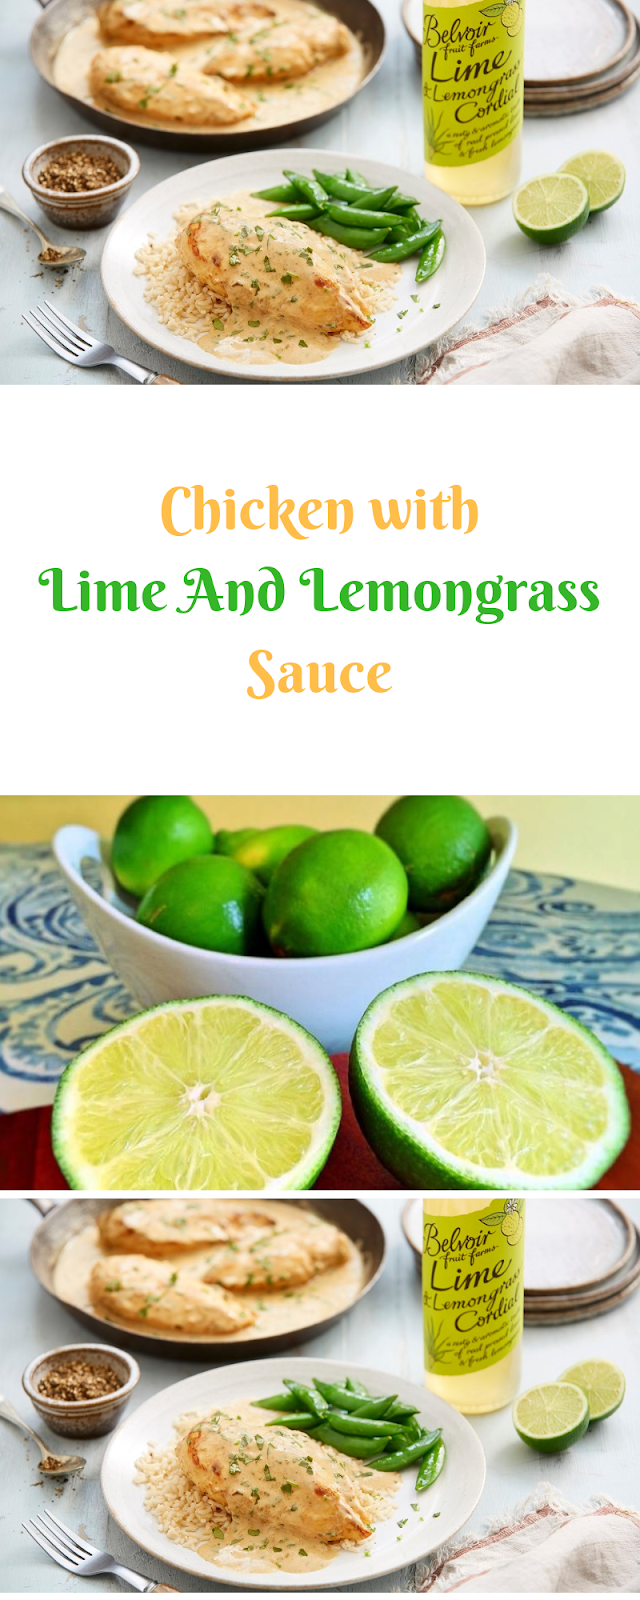 Chicken with Lime And Lemongrass Sauce